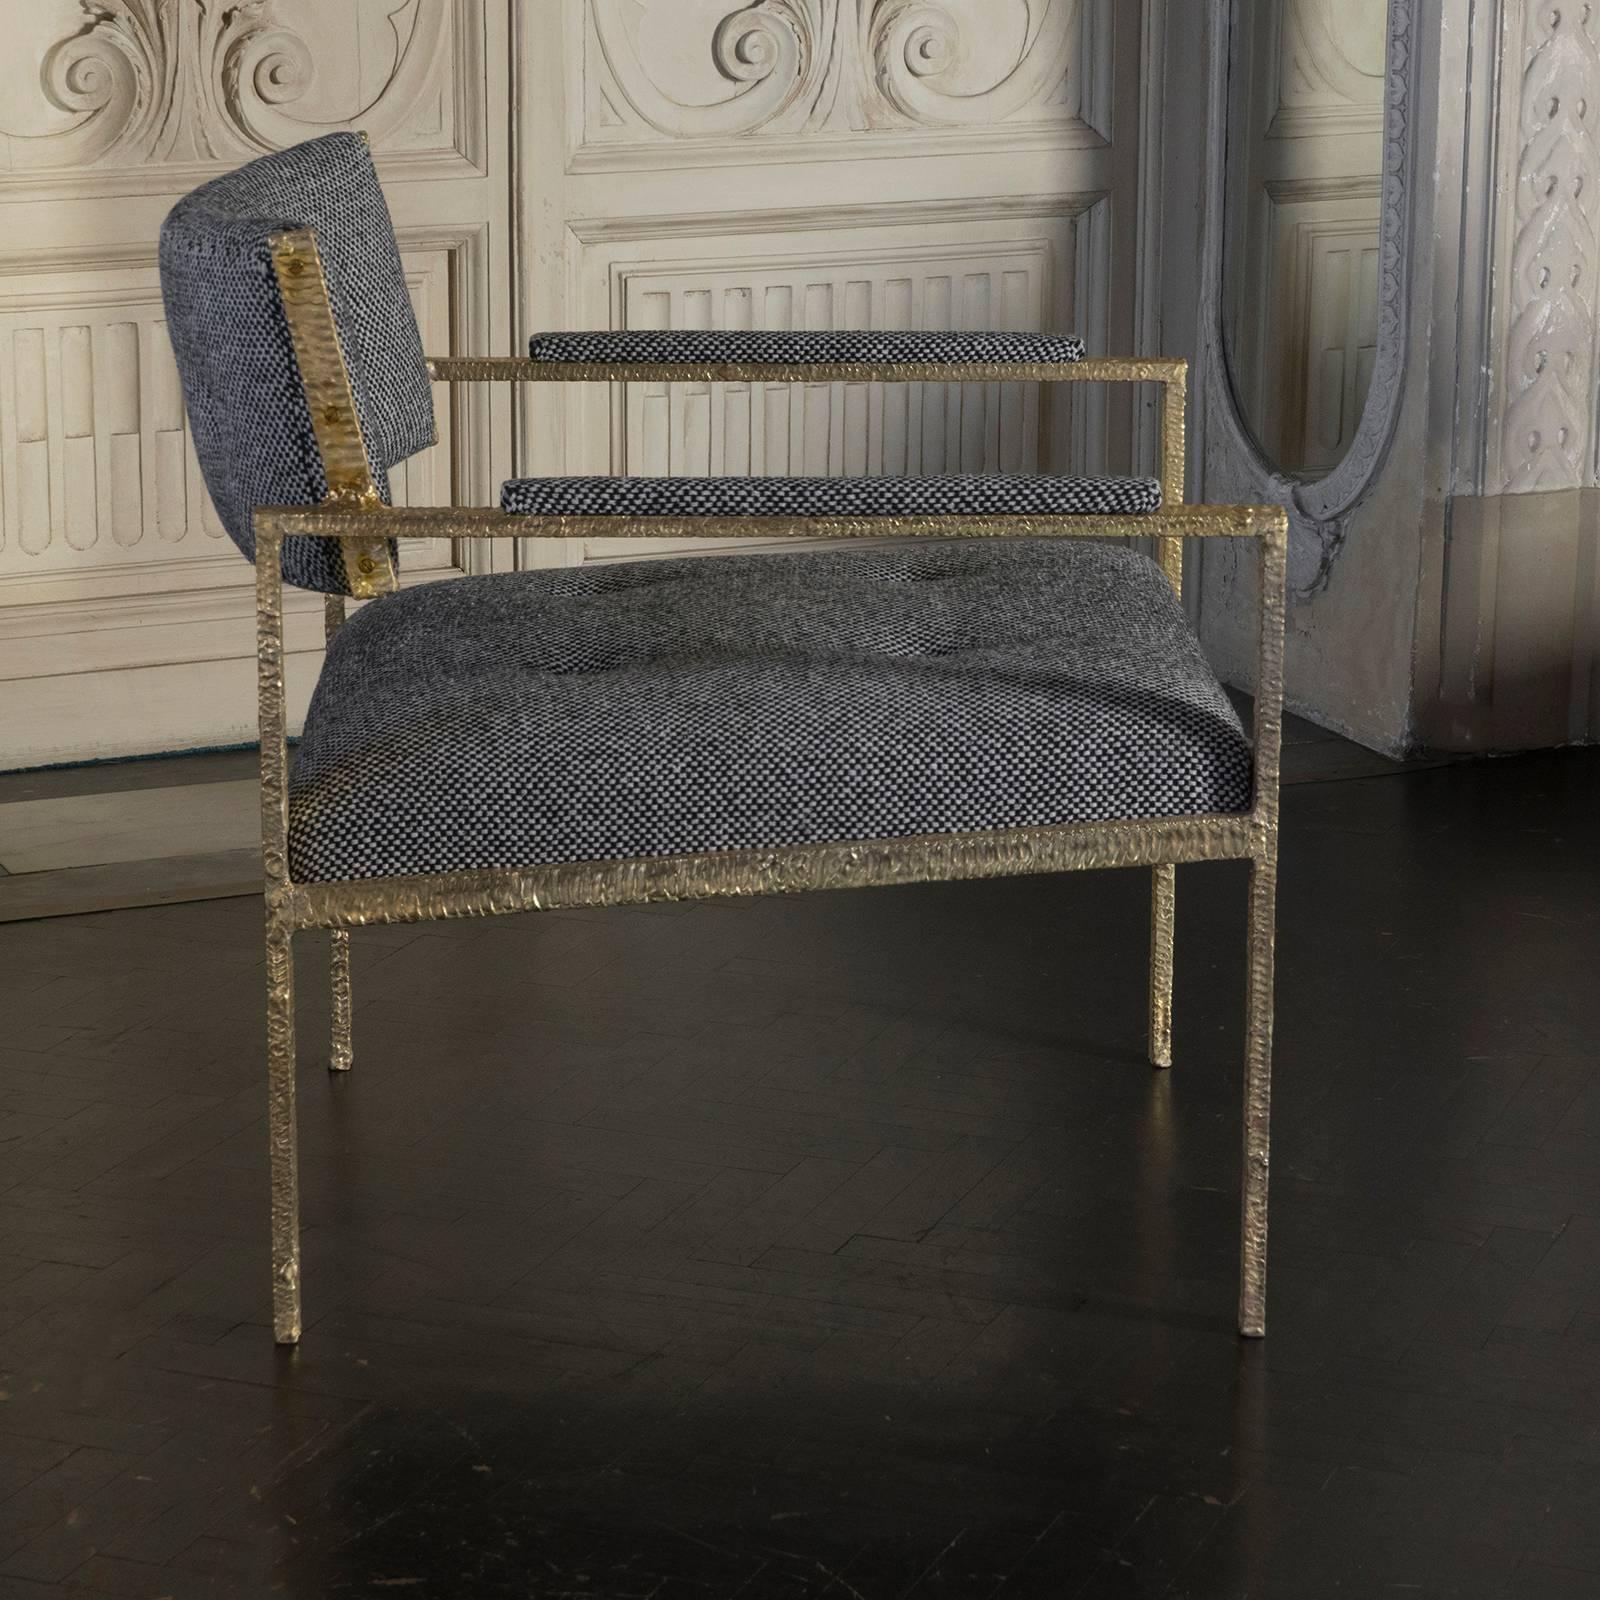 Natural forged brass structure with natural vintage patina, black and white wool fabric.